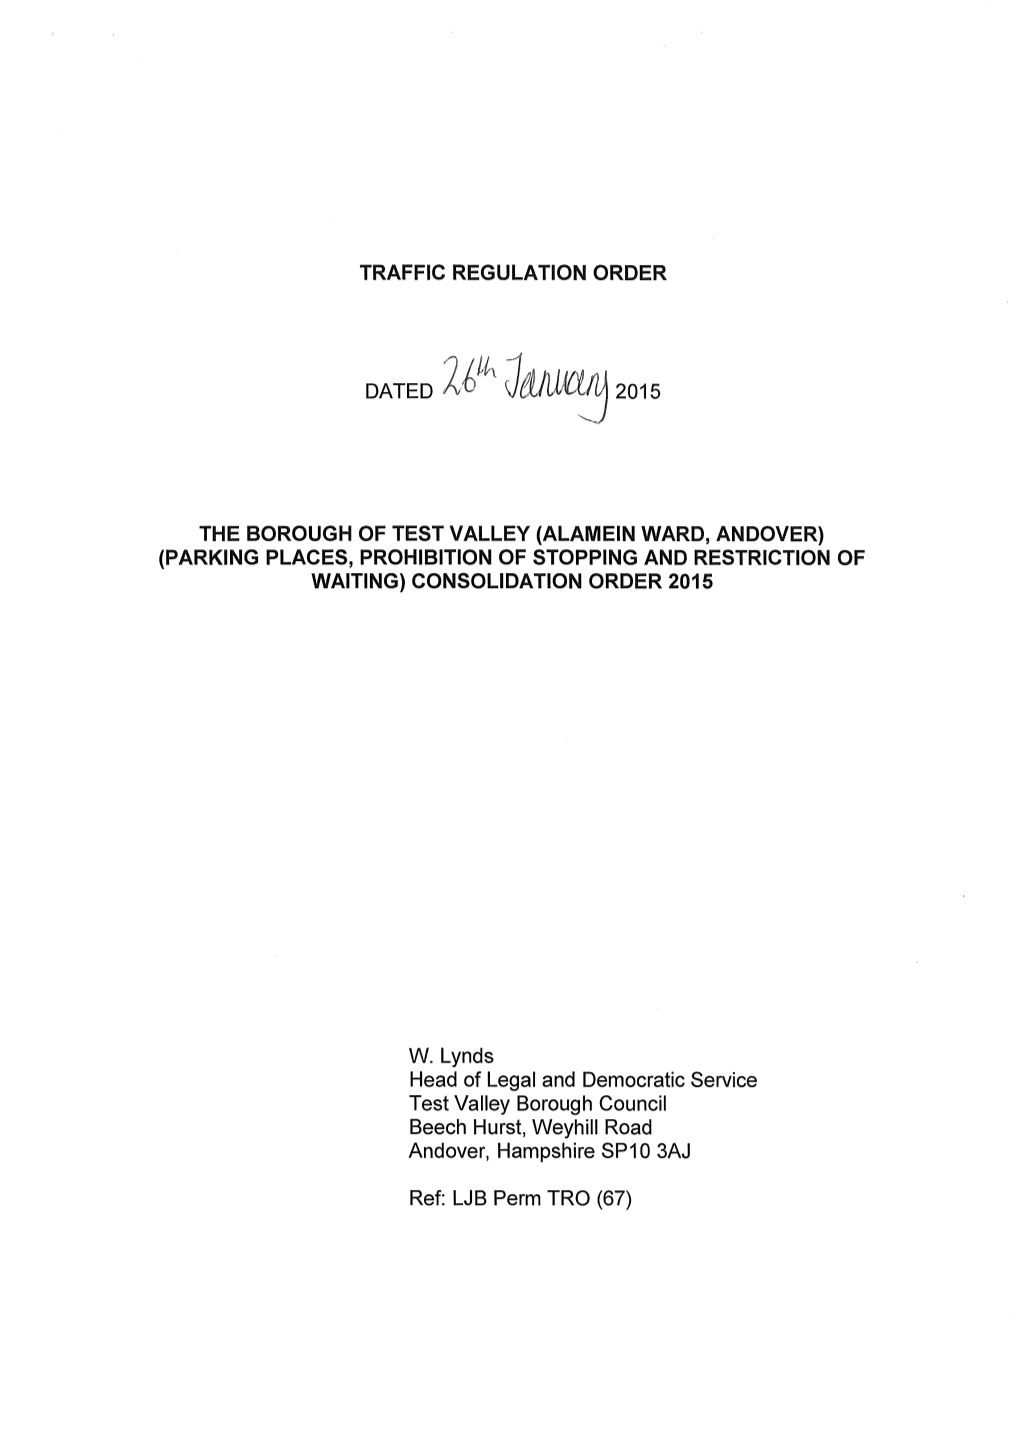 (Alamein Ward, Andover) (Parking Places, Prohibition of Stopping and Restriction of Waiting) Consolidation Order 2015